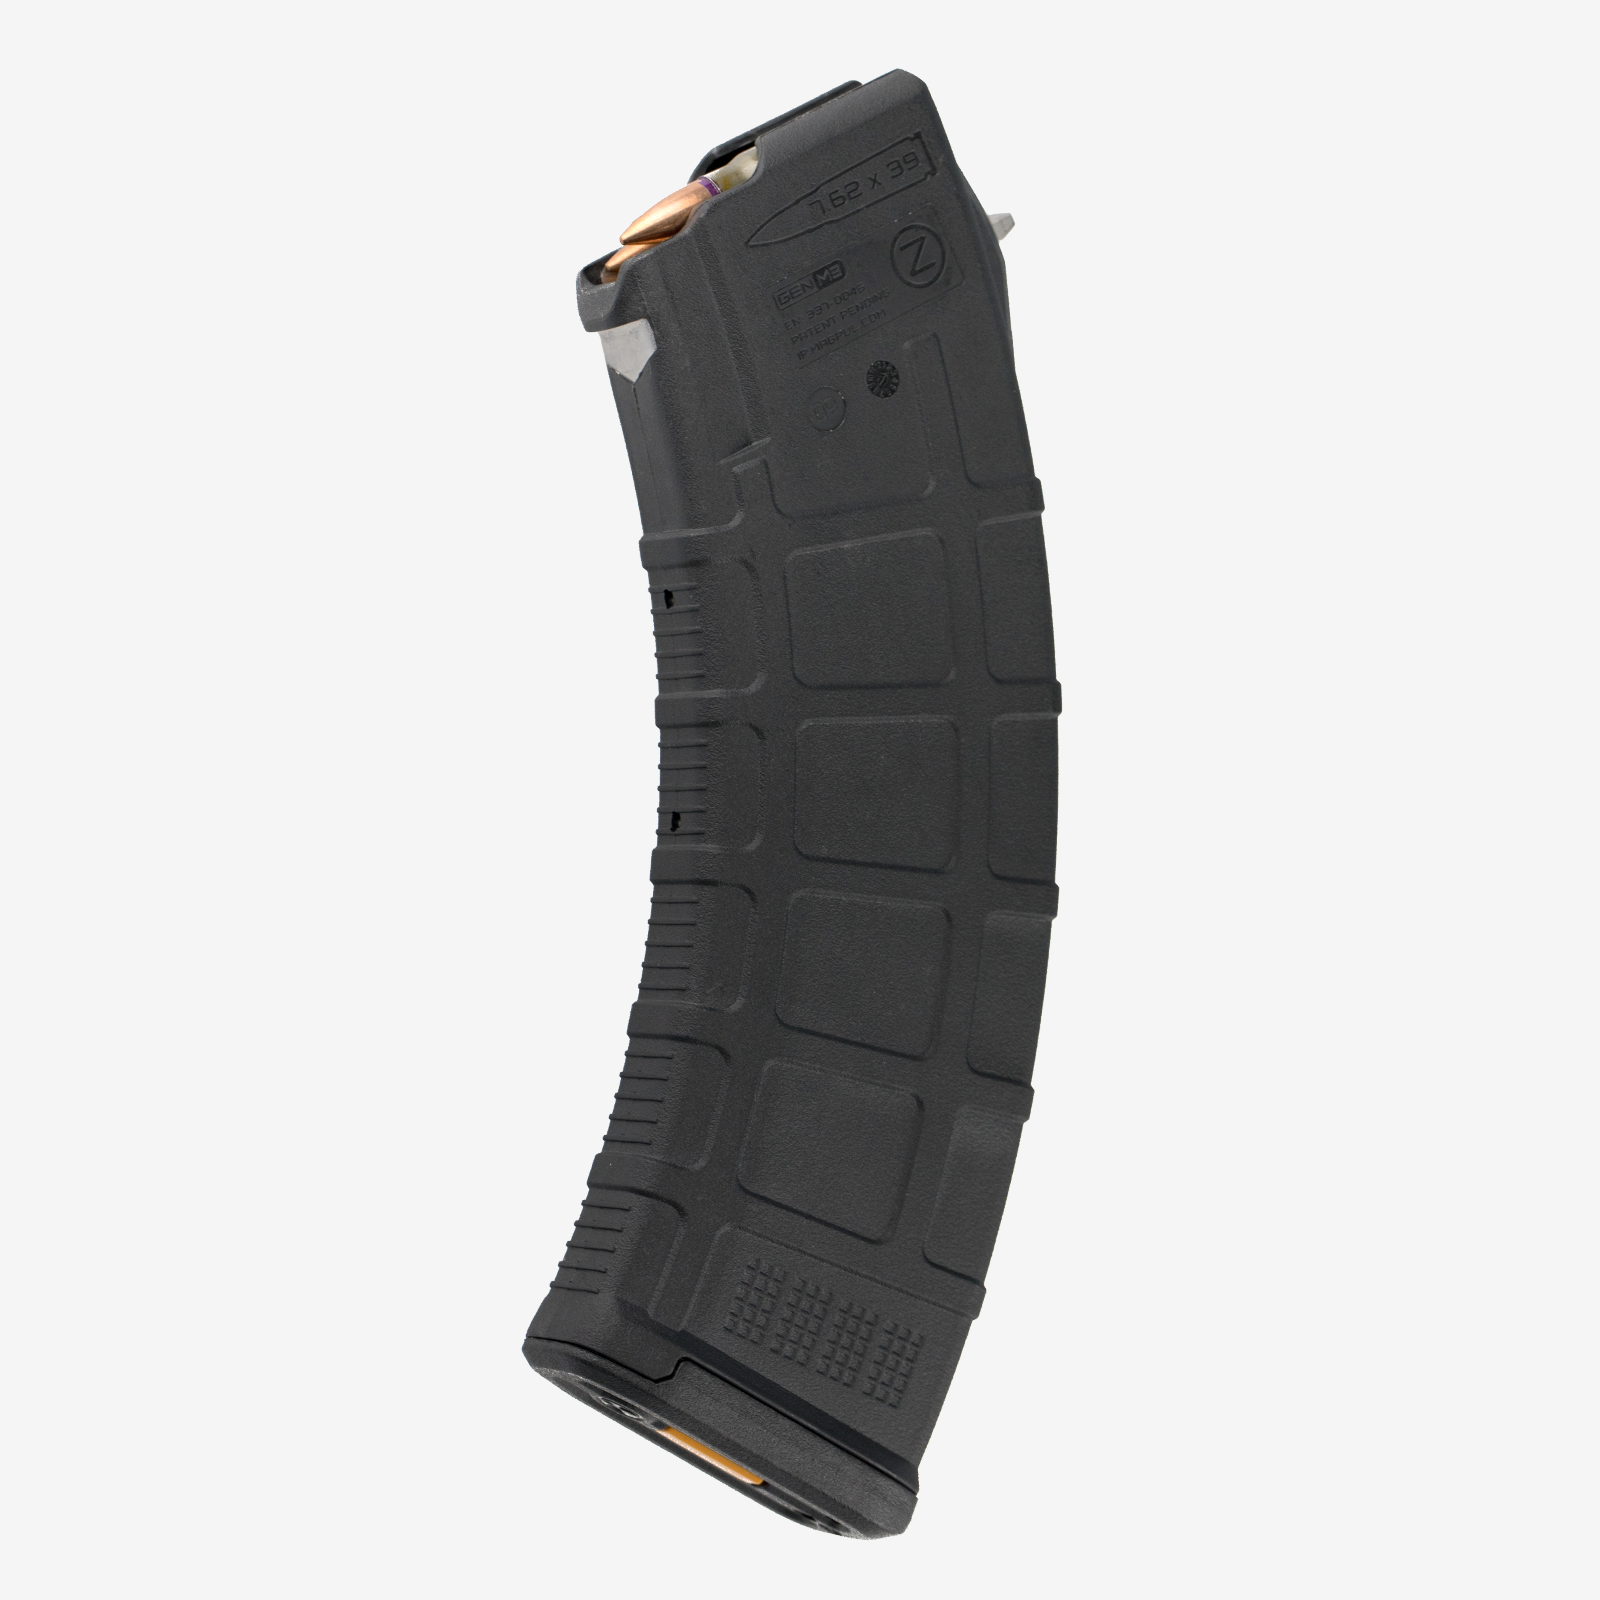 The Magpul 30RD AK47 GEN3 PMAG rifle magazine holds 30 7.62x39mm cartridges for use with AK-47 rifles and similar platforms.